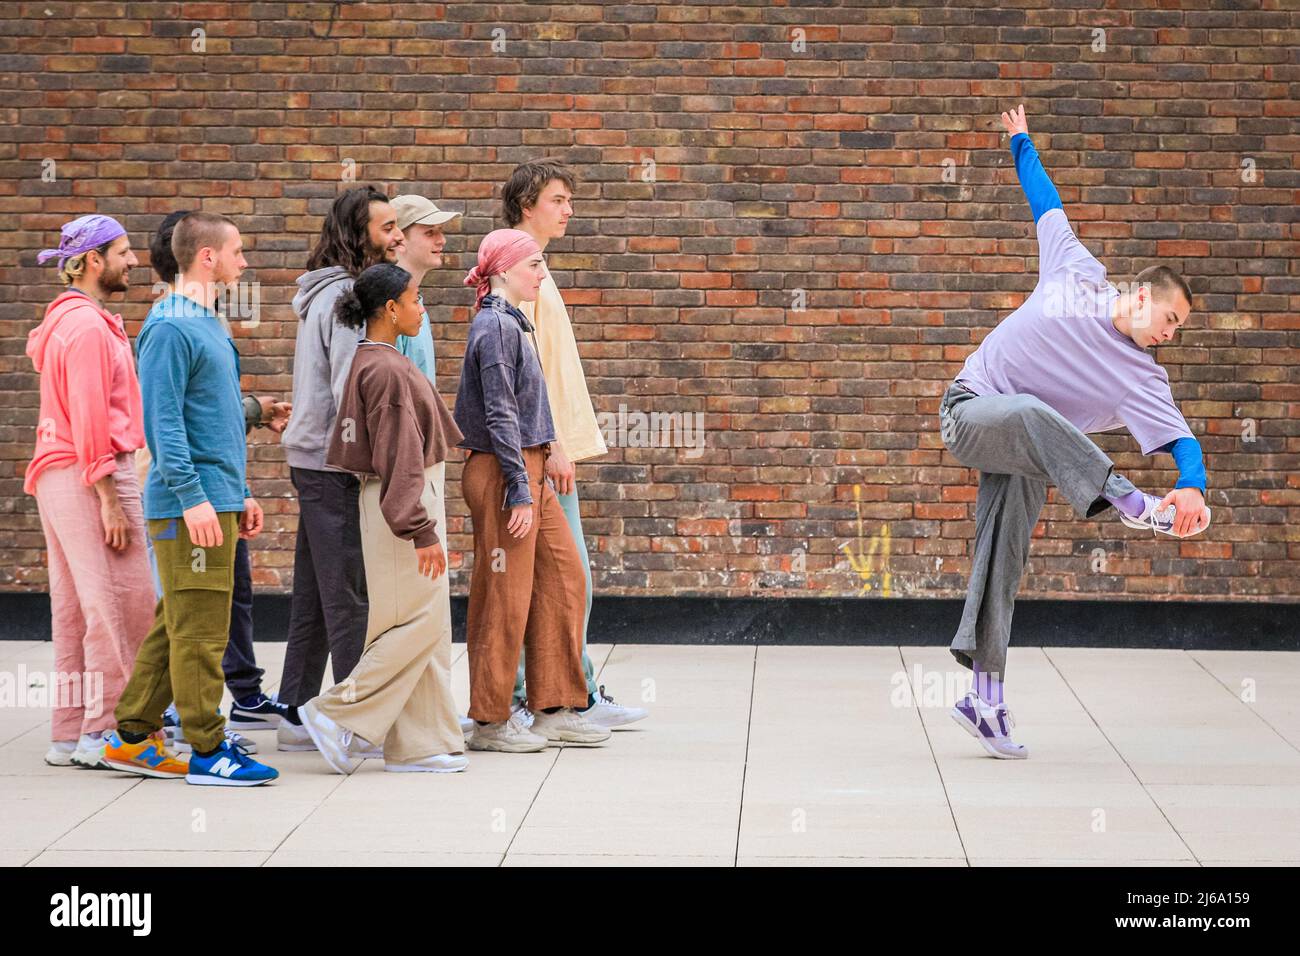 London Uk 29th April 22 Dylan Springer Left Performs Solo Moves And Jumps With The Rest Of The Cast Performers During The Photocall Run Through For The New Ockham S Razor Show Public Performing